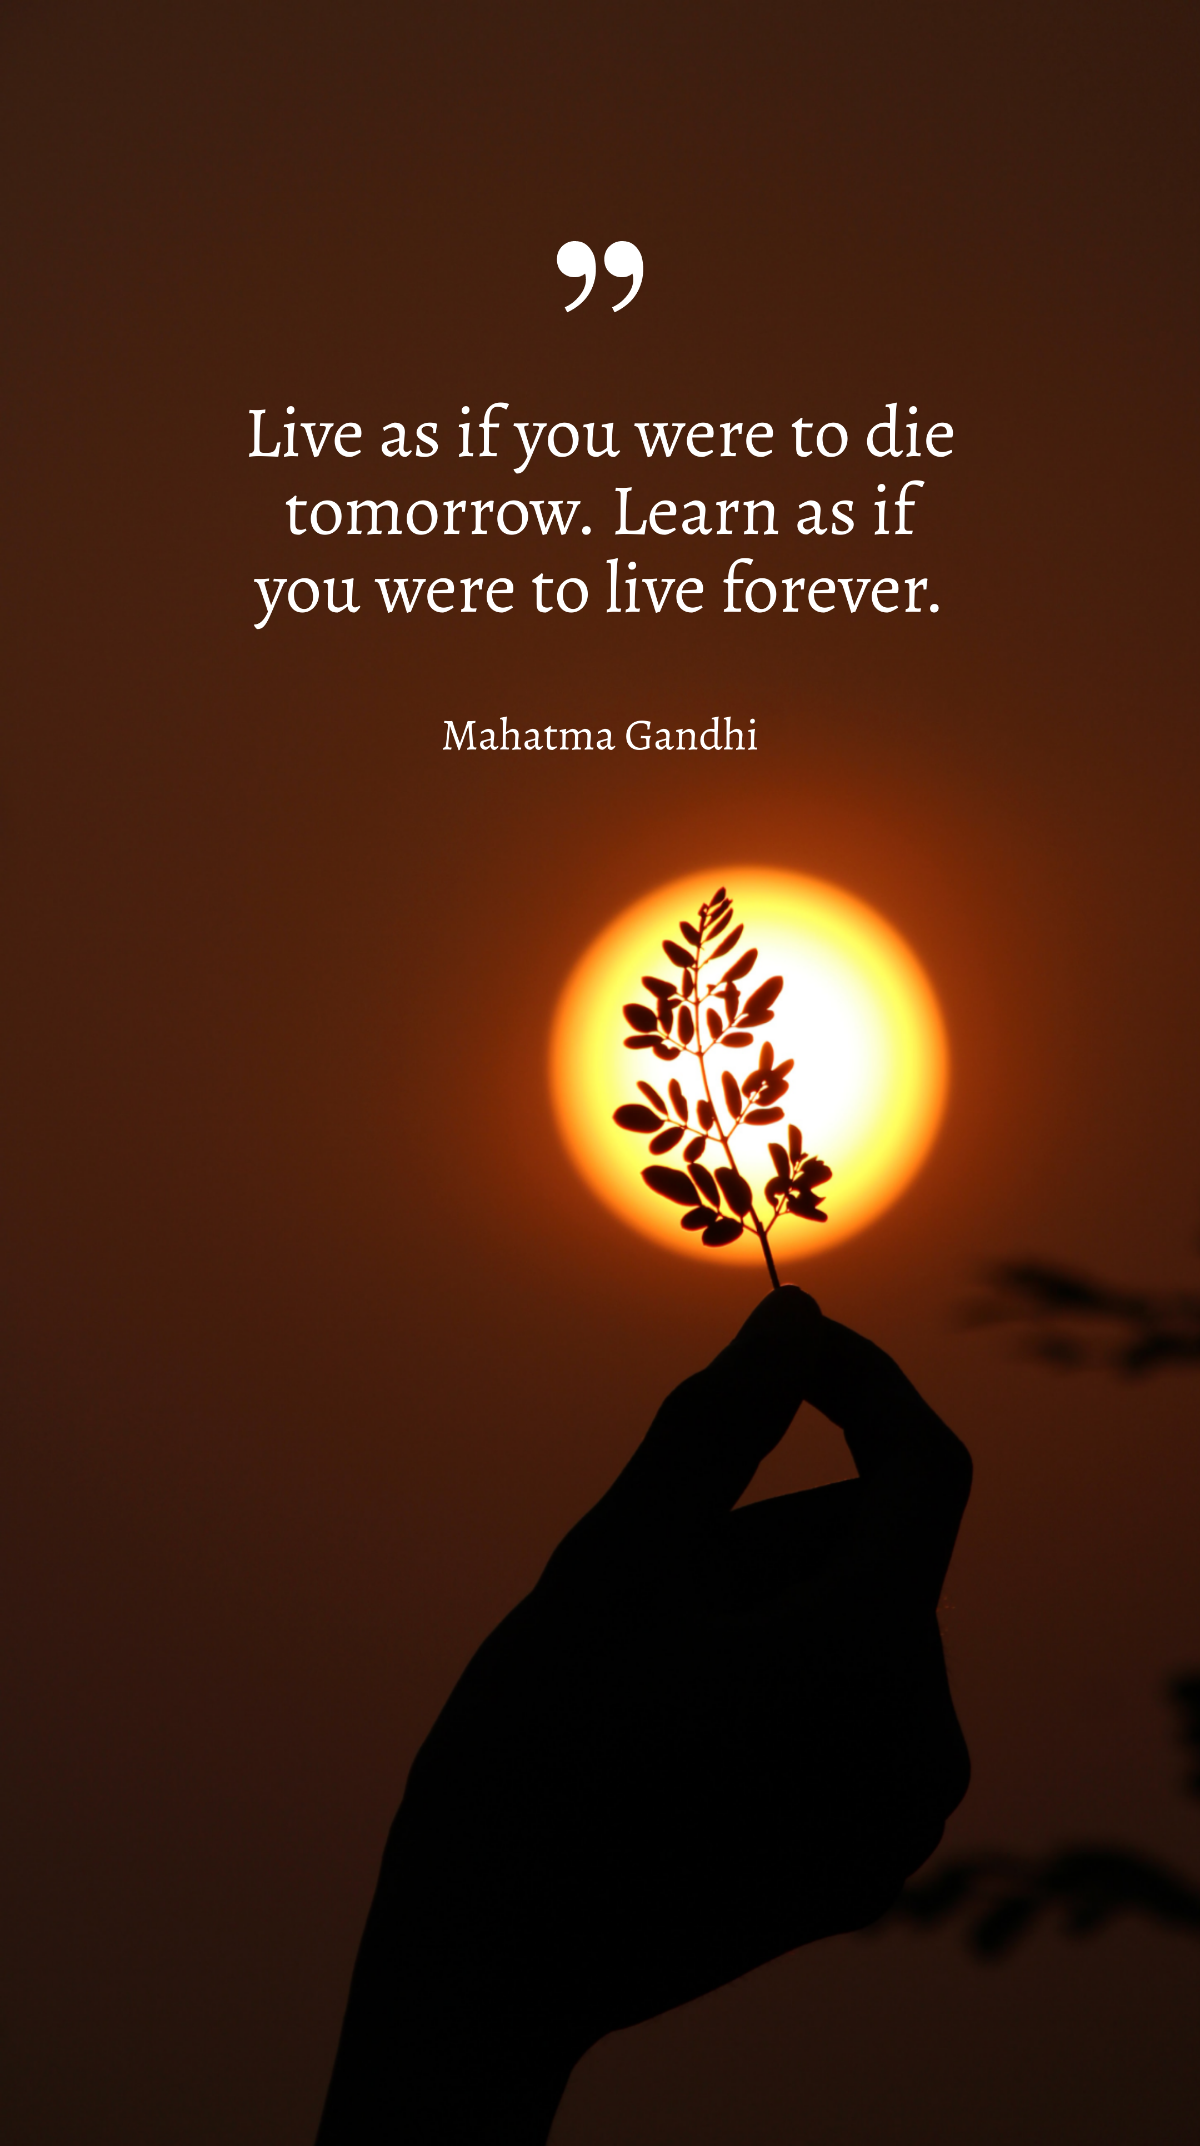 Mahatma Gandhi - Live as if you were to die tomorrow. Learn as if you were to live forever Template